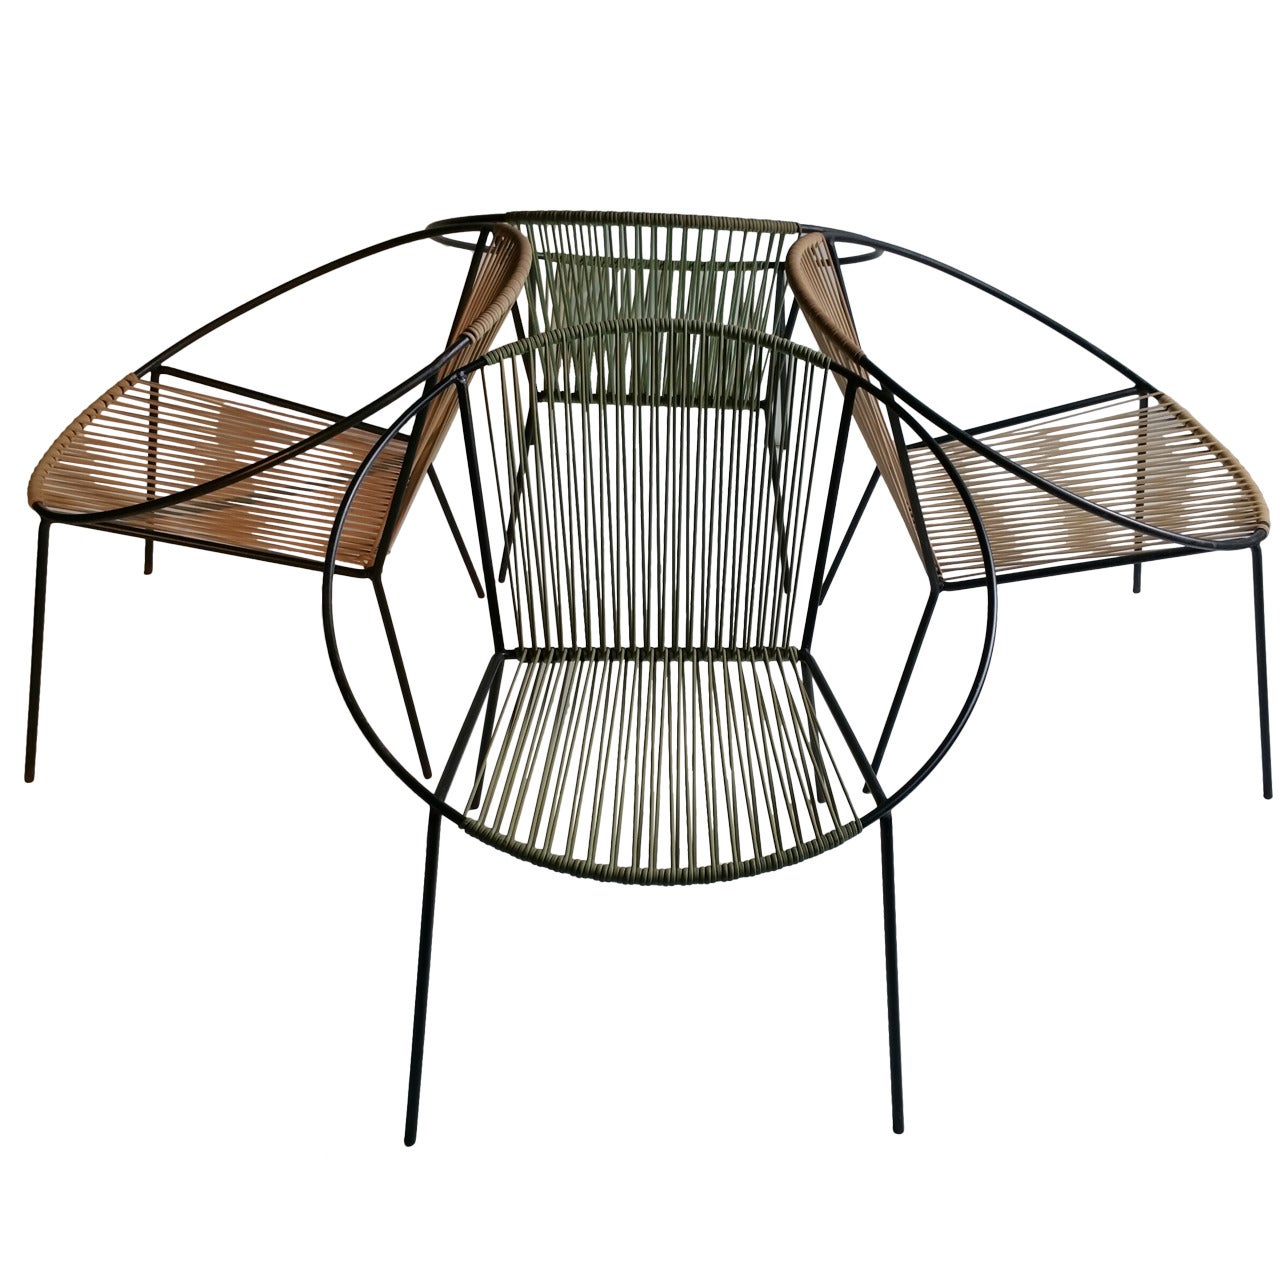 Classic Mid-Century Modern Outdoor "Hoop" Chairs by Salterini